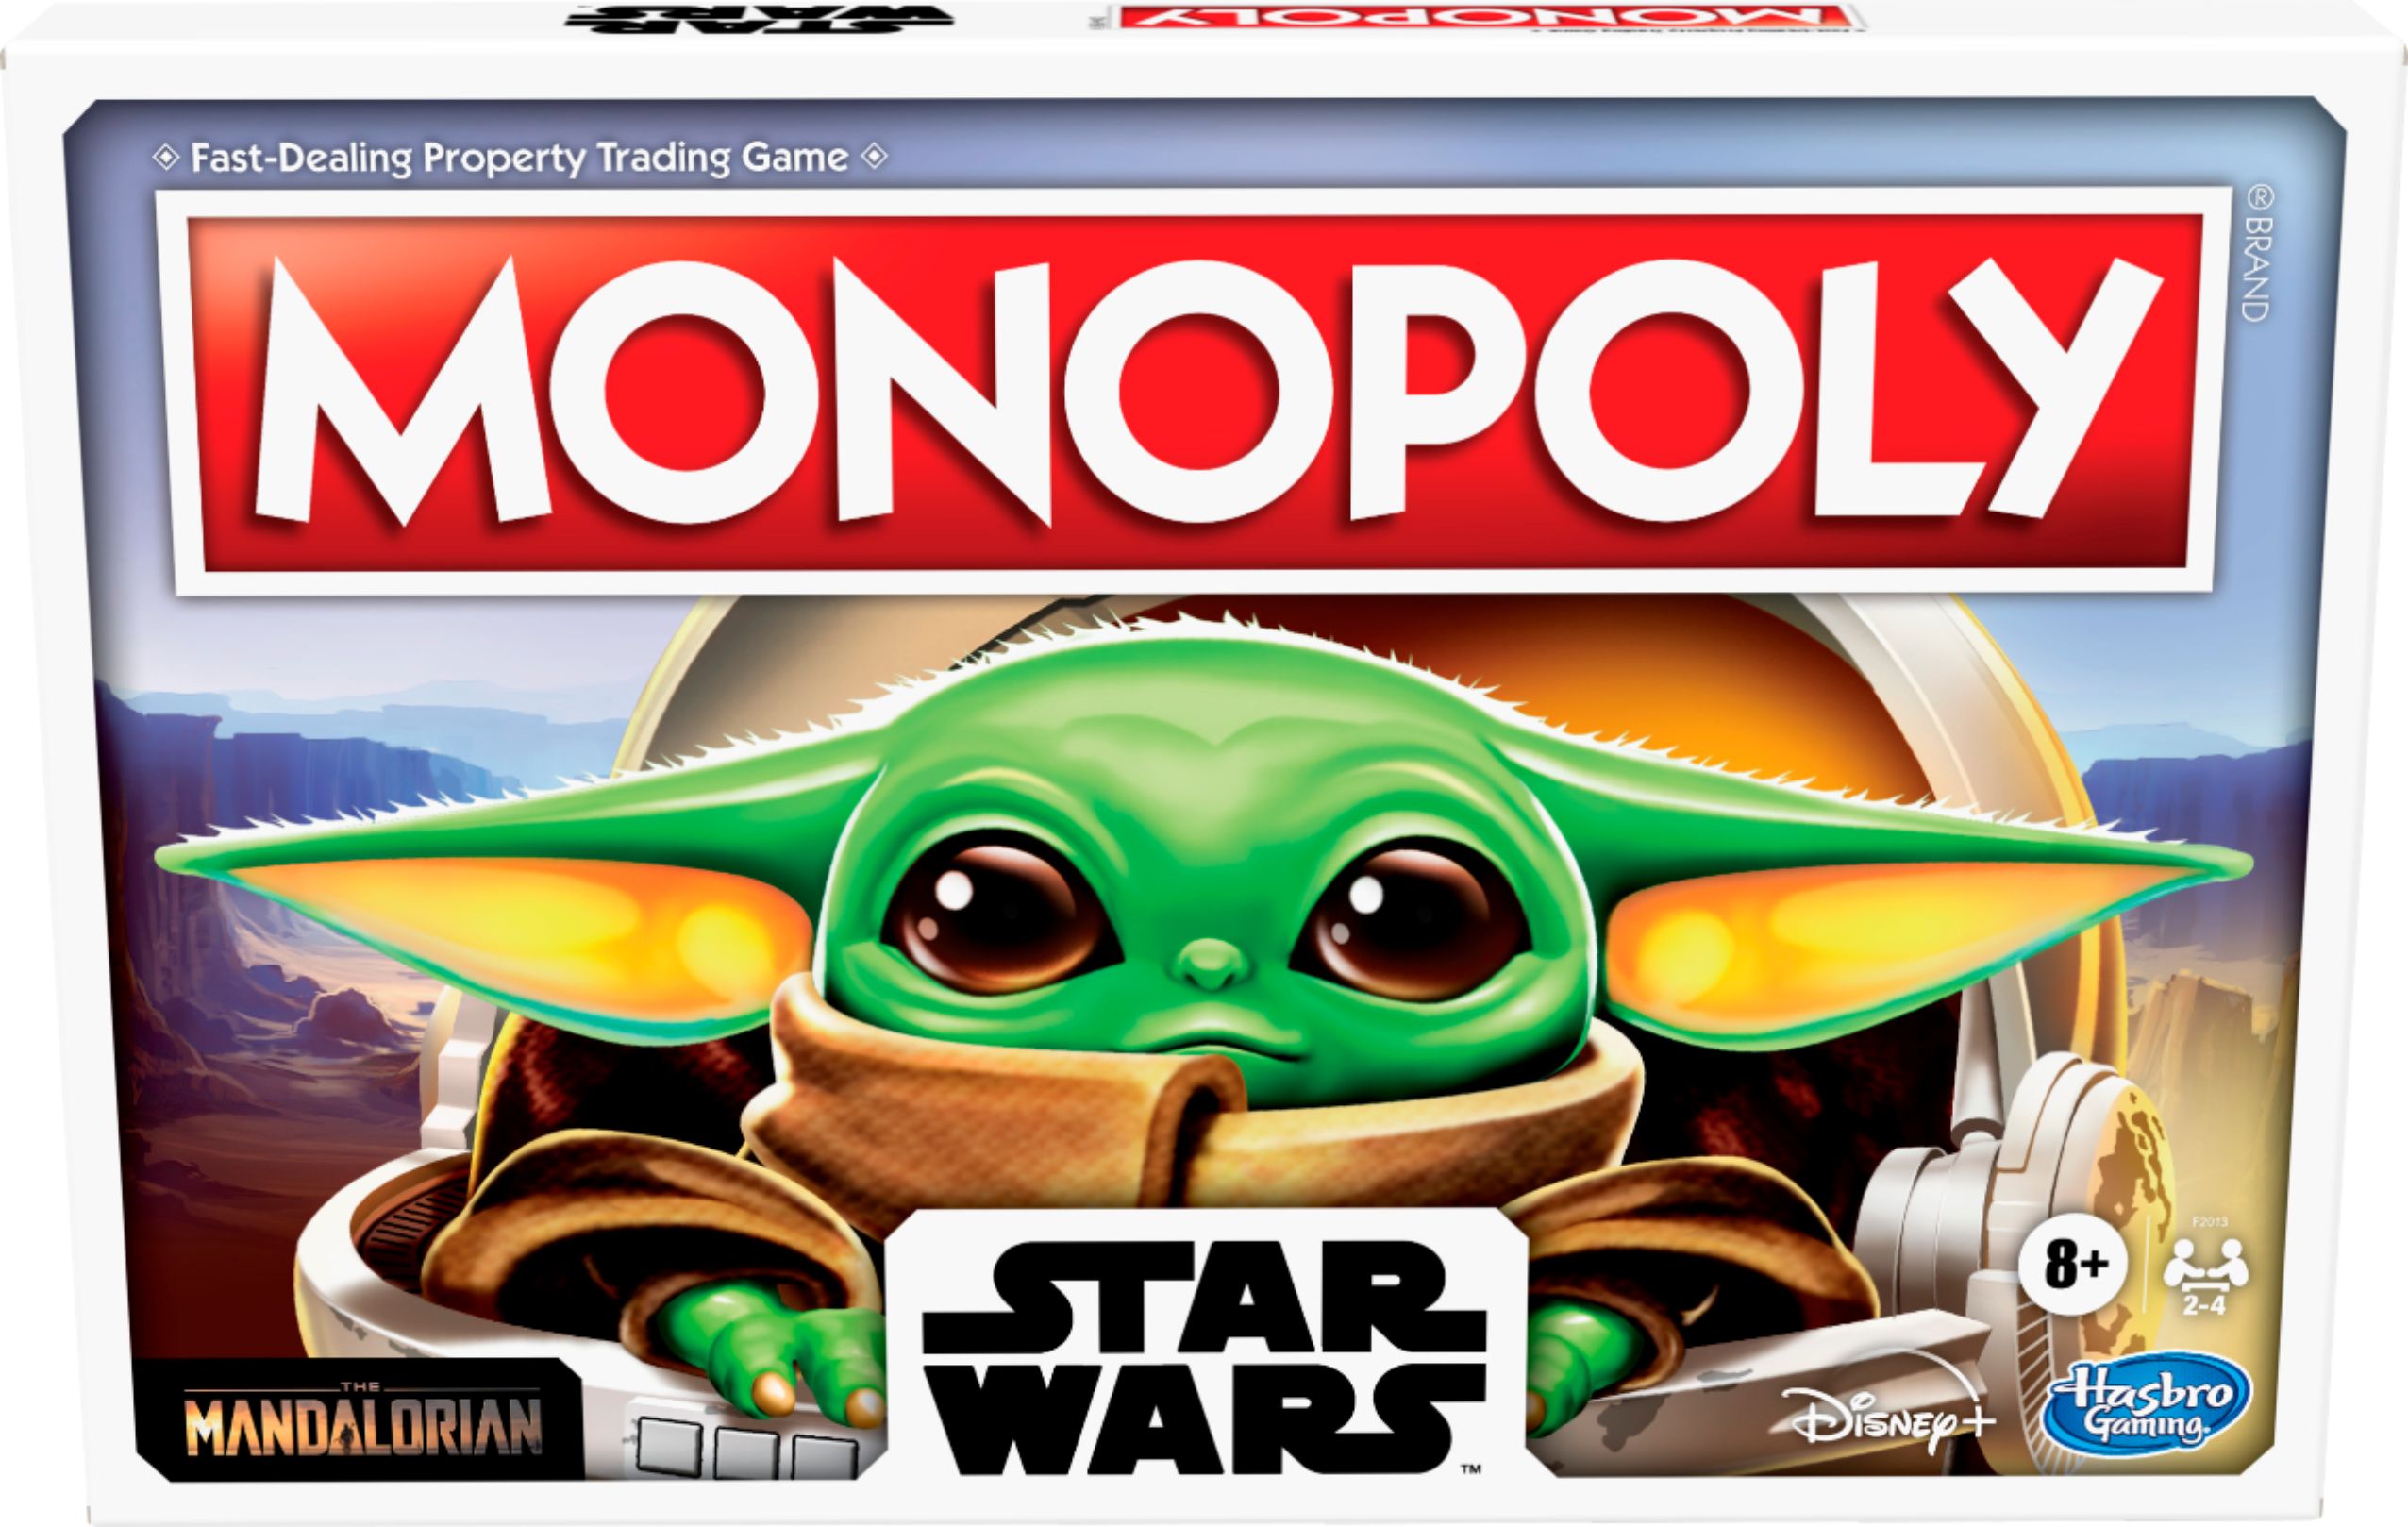 for sale online Star Wars The Child Edition Board Game for Kids and Families MONOPOLY ITEM F2013 